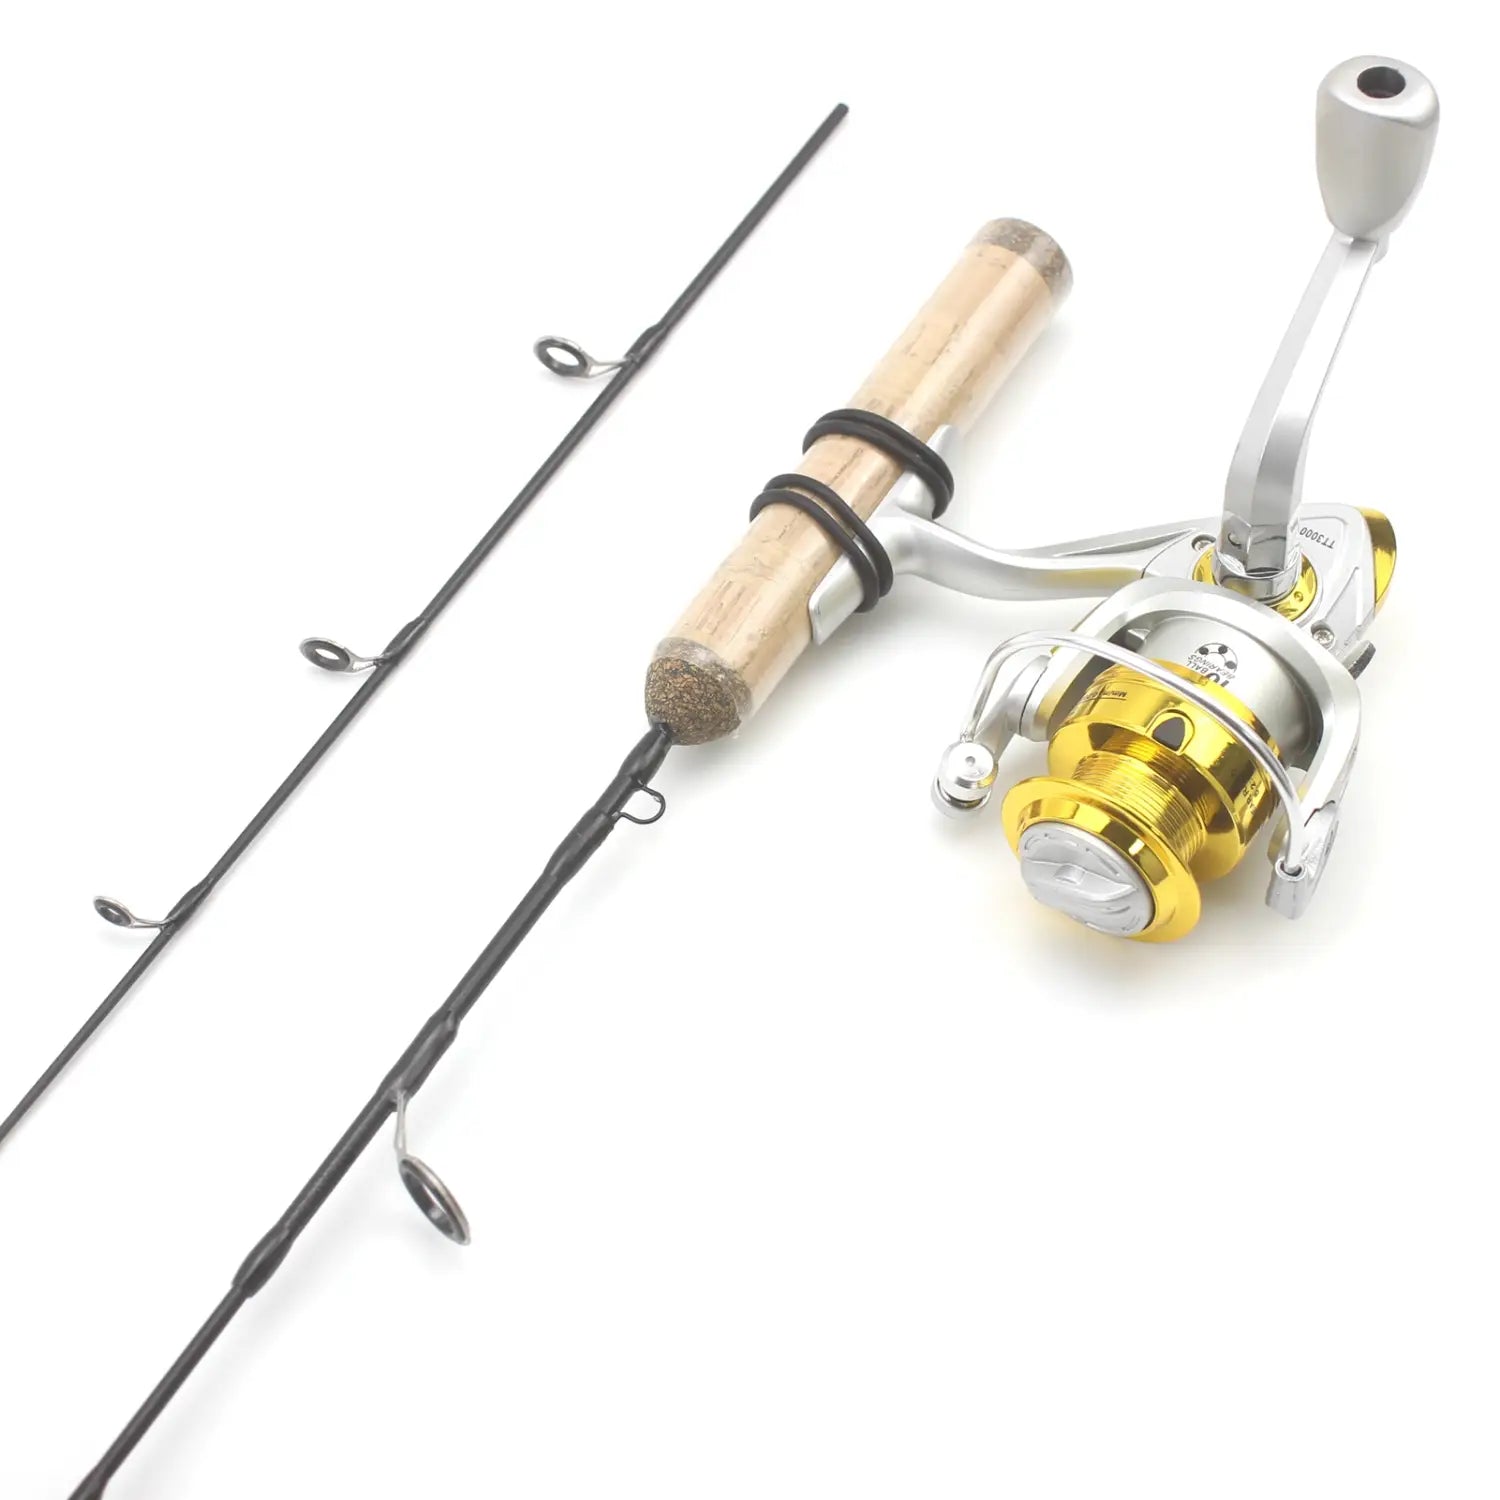 65cm 2Tips Rod Reel Combos Winter Ice Fishing set Pole Tackle Carbon pole rod with reel Pikes fish